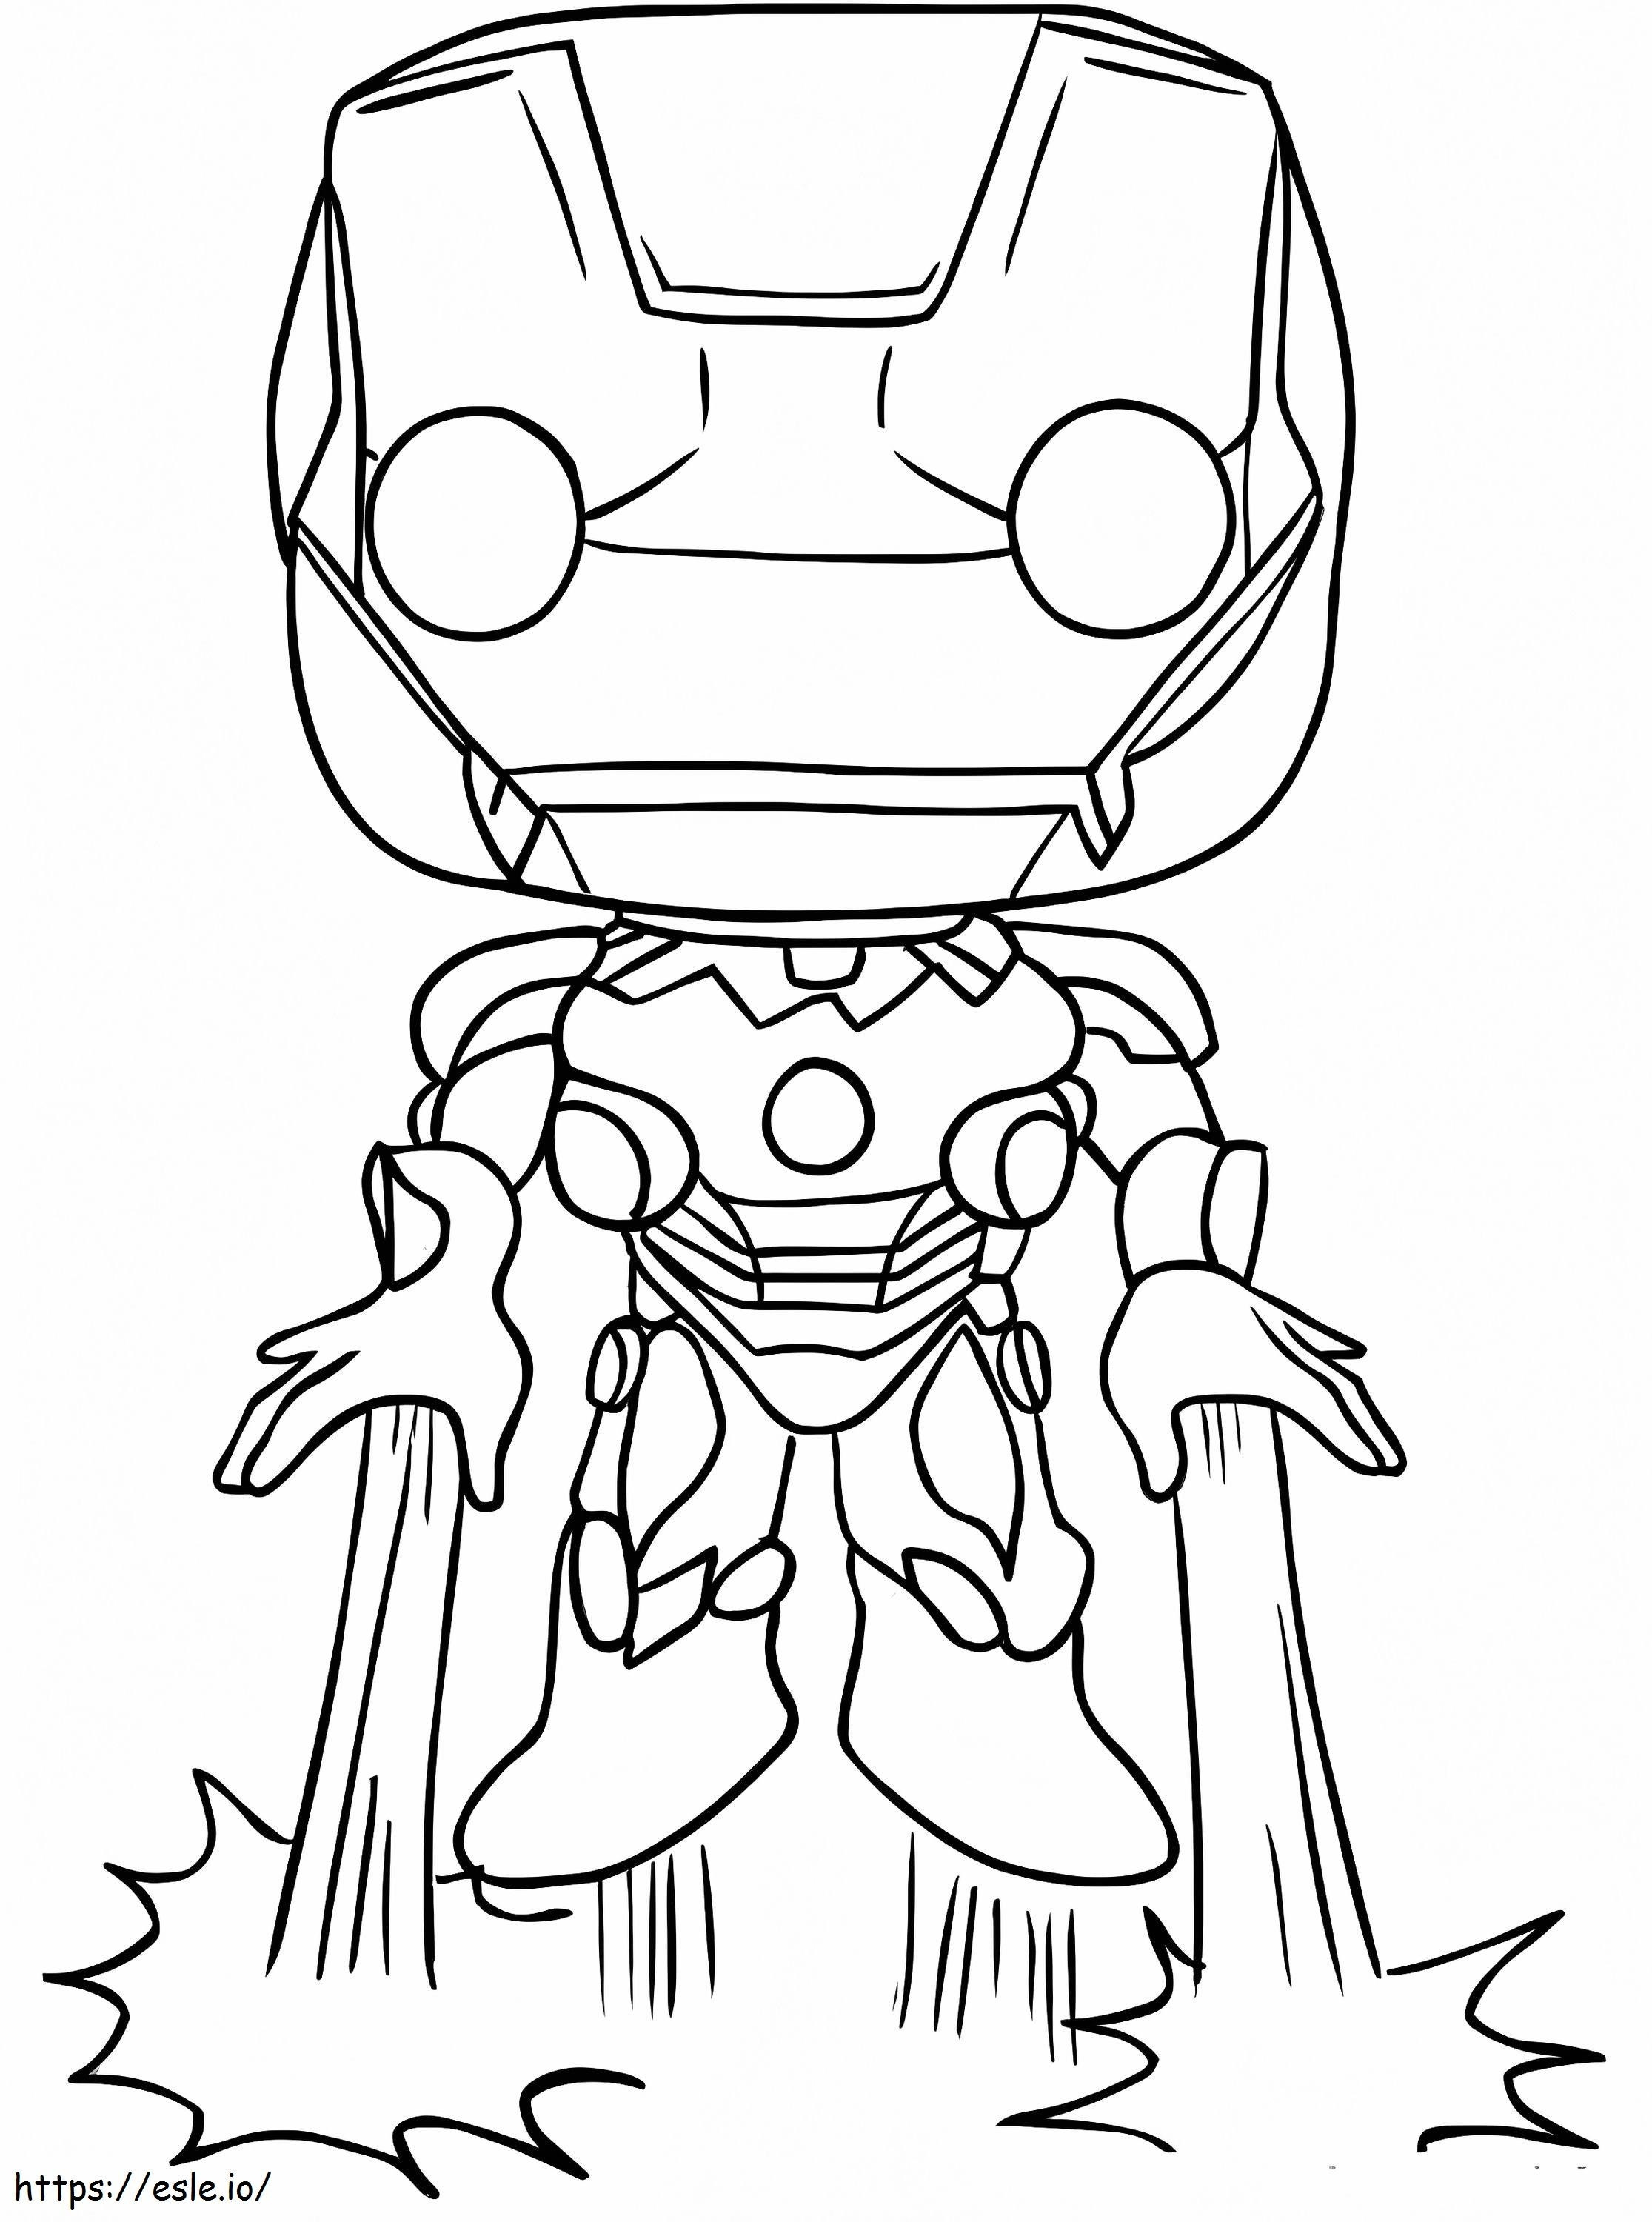 Funko Pop Ironman coloring page